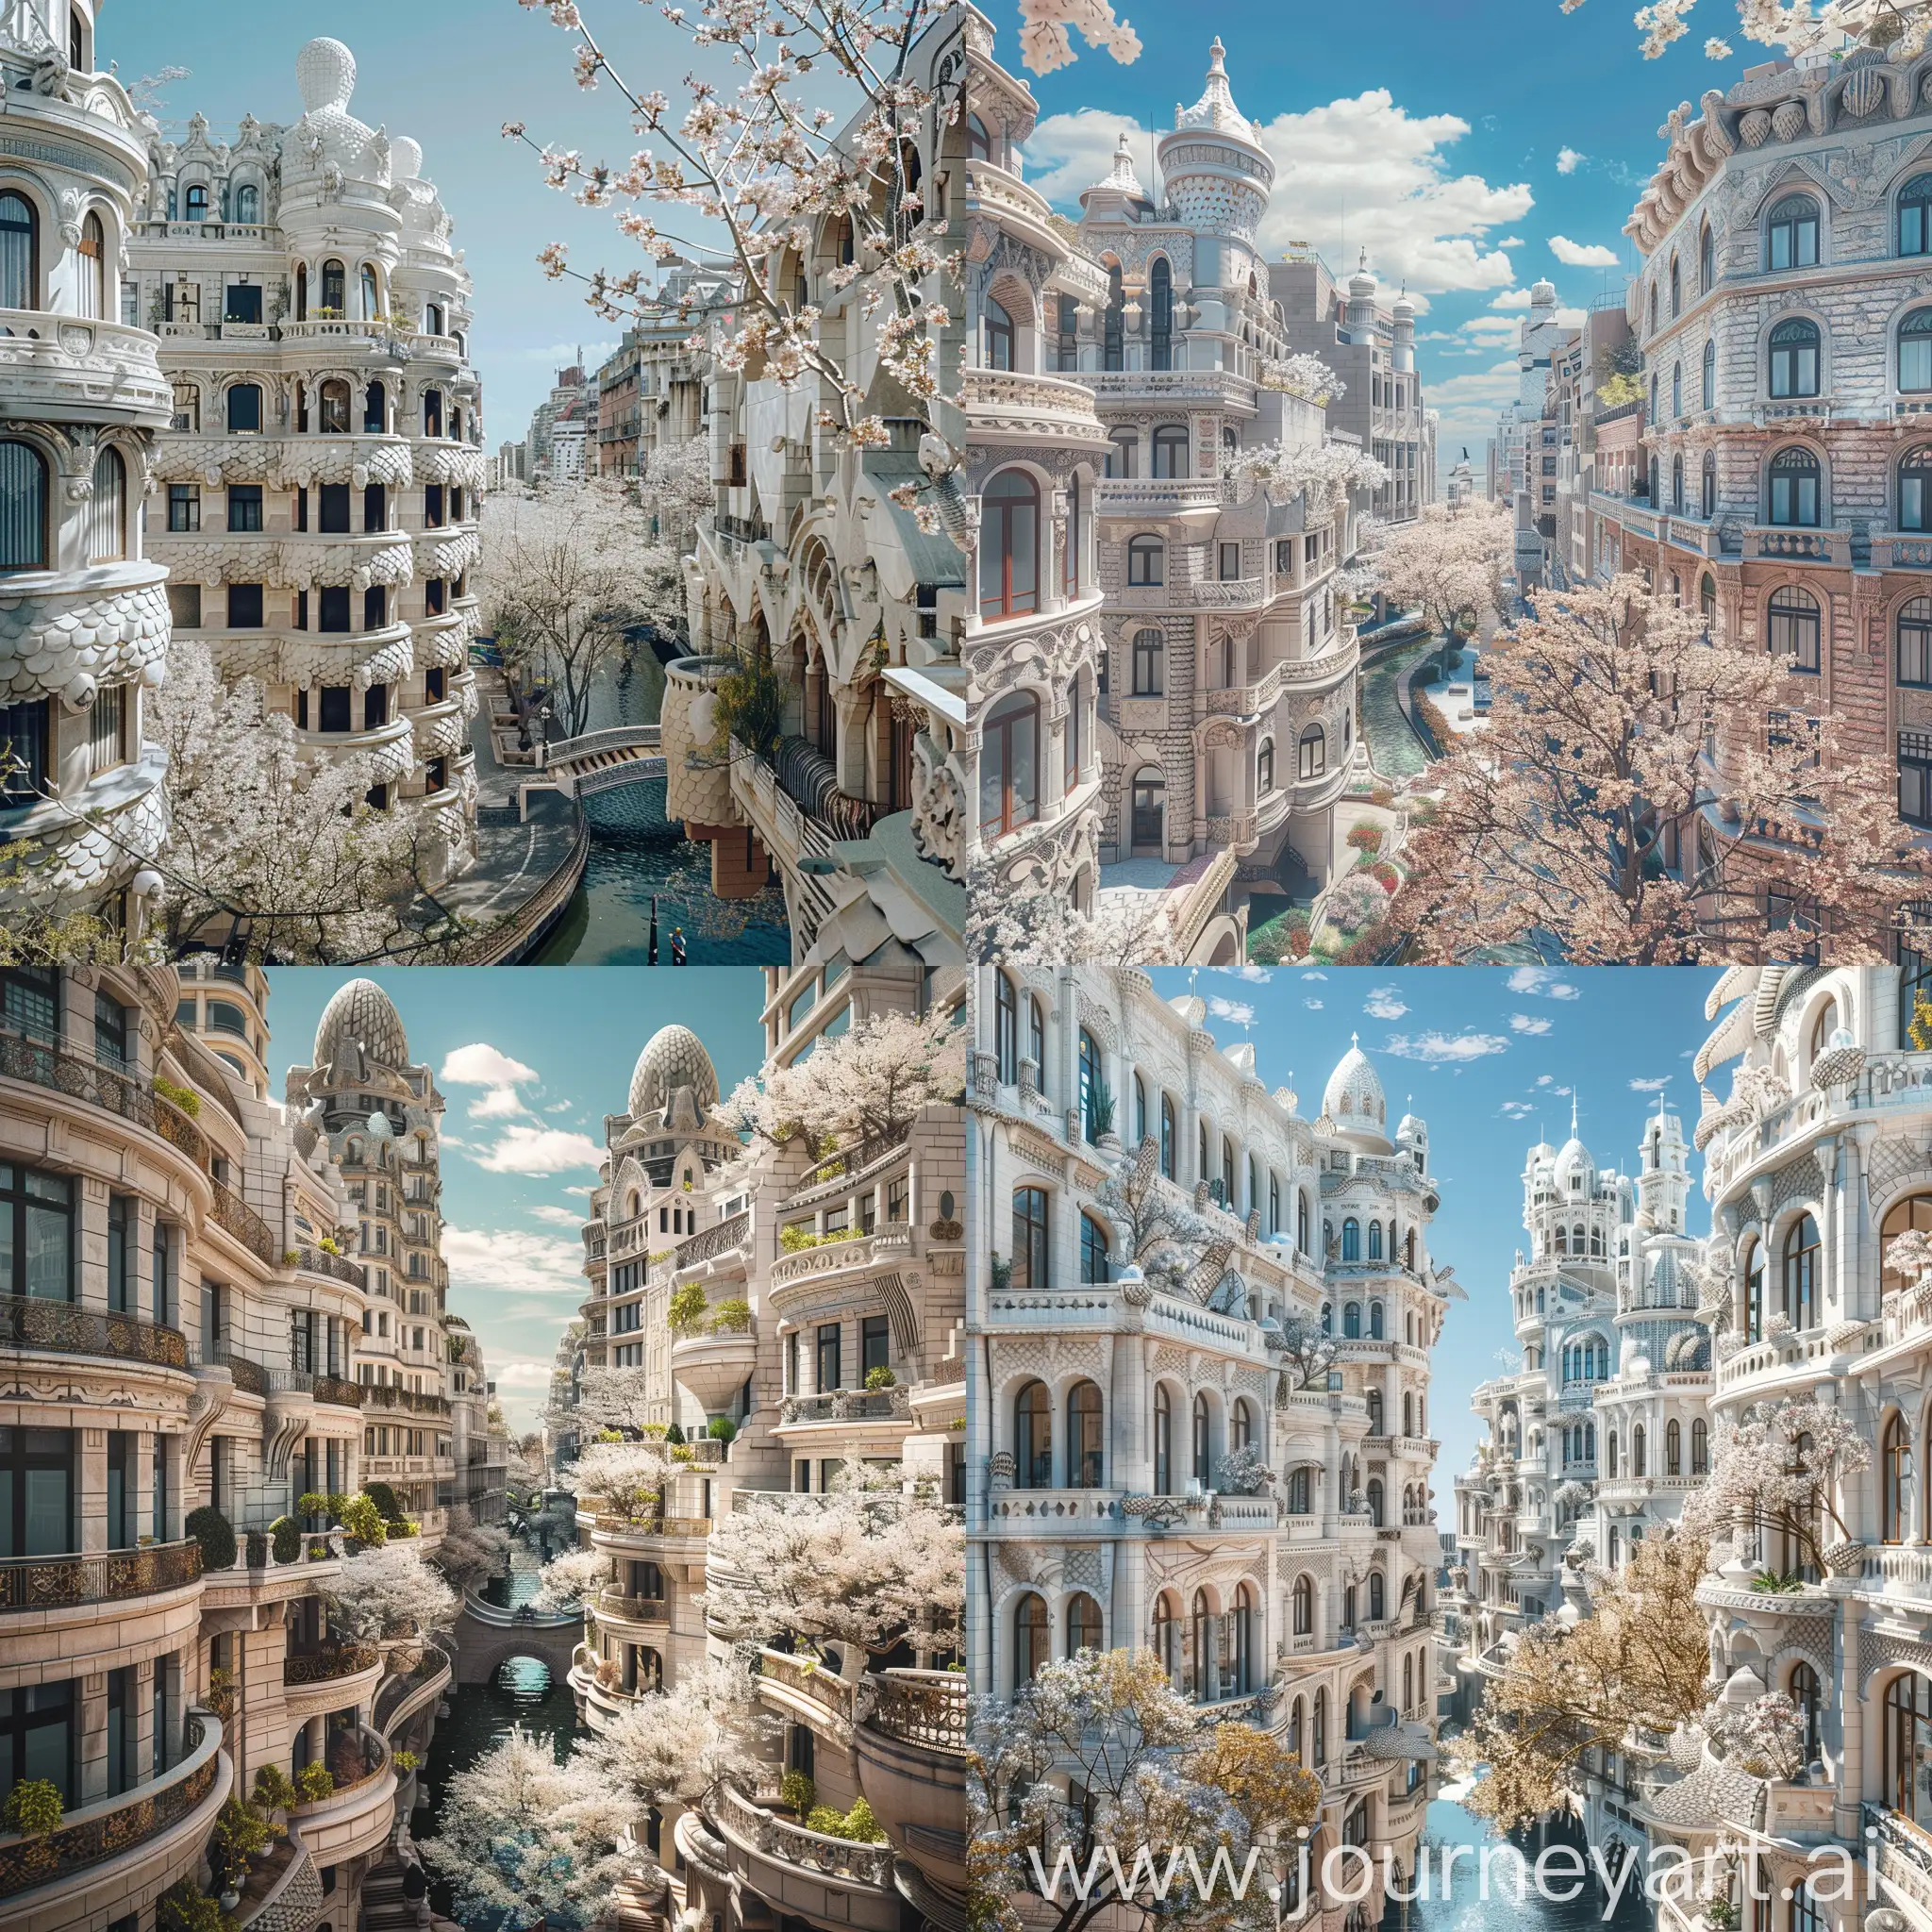 Ornate-Travertine-Architecture-in-a-Futuristic-Metropolis-with-Terraced-Buildings-and-Blossoming-Trees